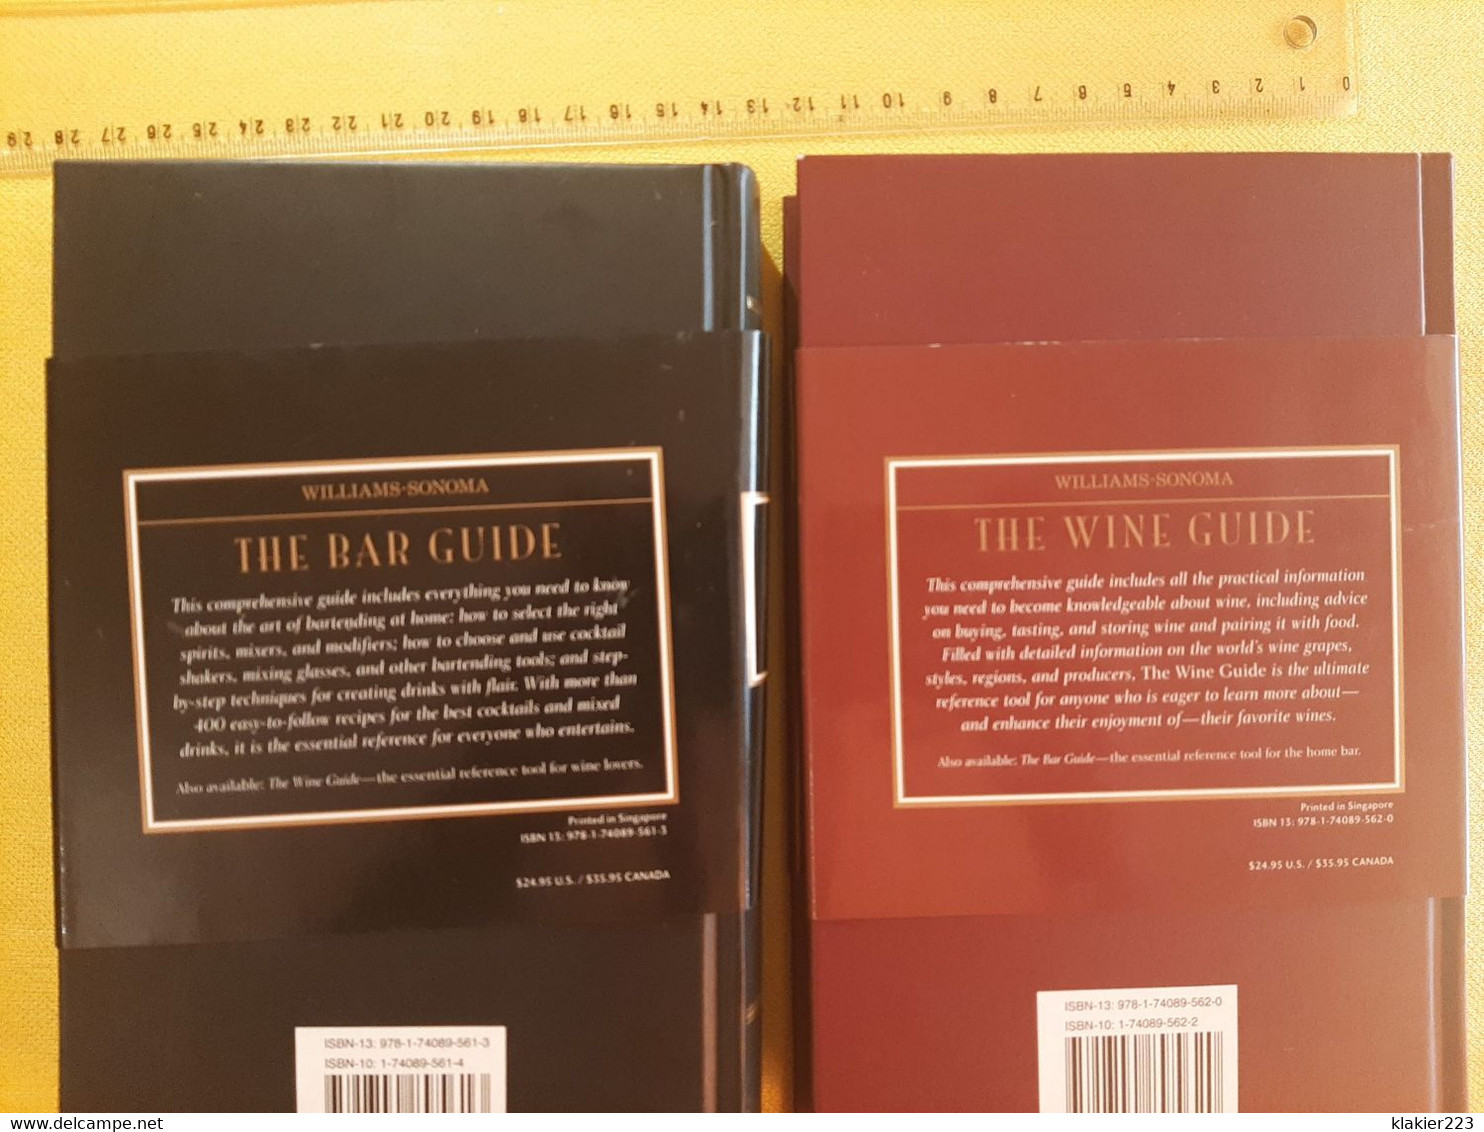 Williams-Sonoma - The Bar Guide / The Wine Guide - Europese